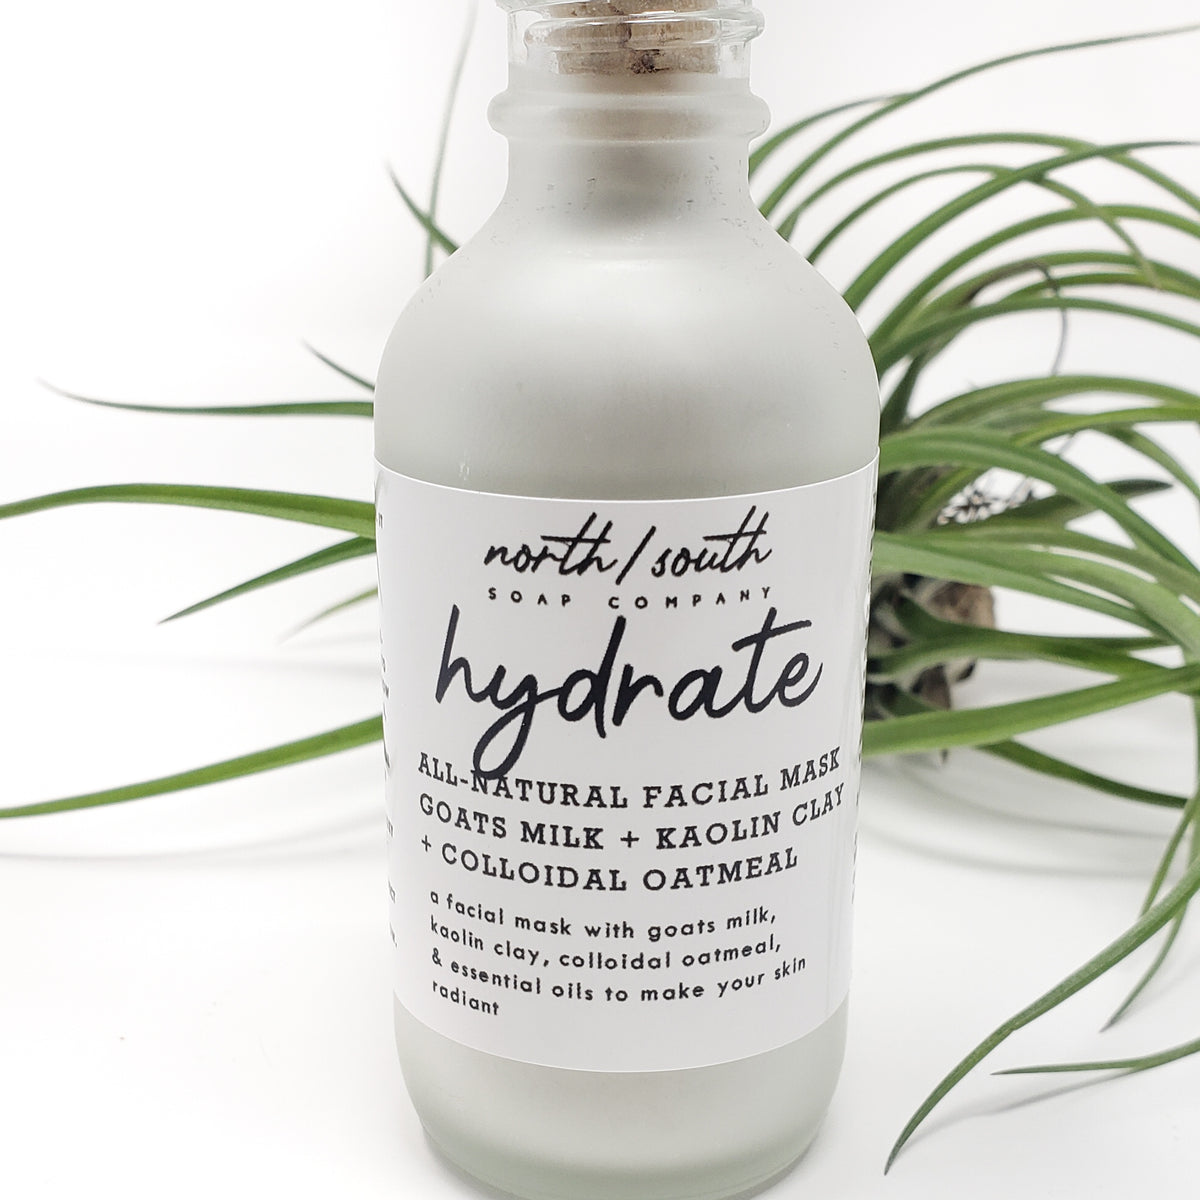 Hydrate All Natural Face Mask - Goats Milk + Kaolin Clay